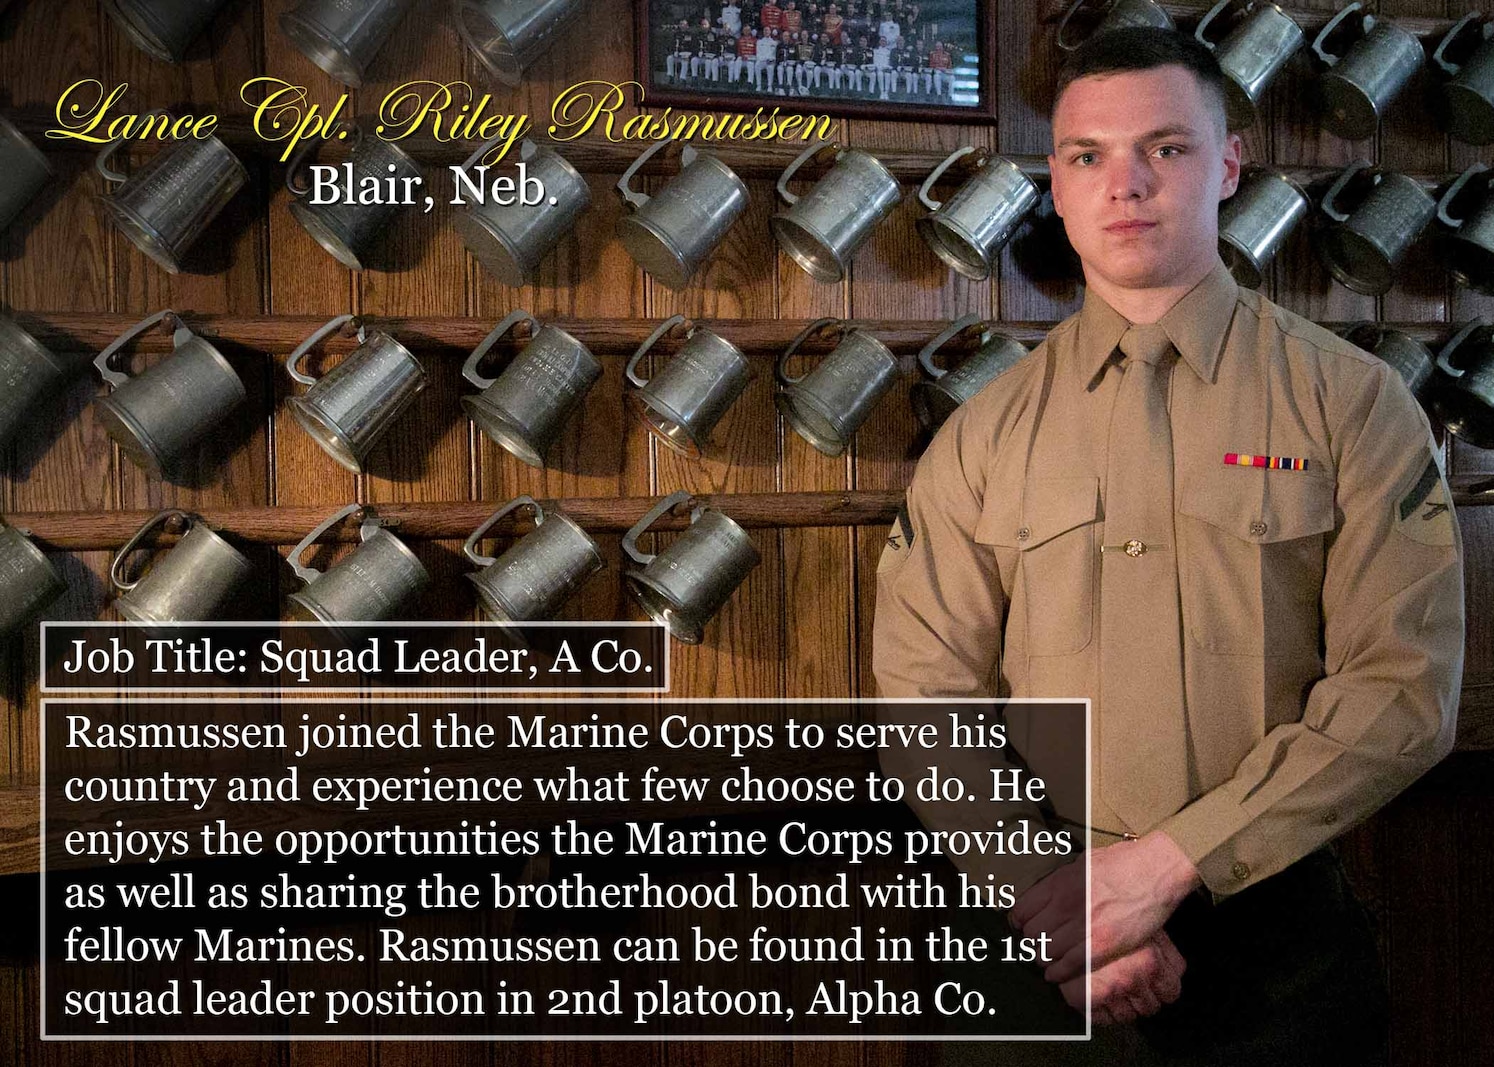 Lance Cpl. Riley Rasmussen
Blair, Neb.
Job Title: Squad Leader, A Co.
Rasmussen joined the Marine Corps to serve his country and experience what few choose to do. He enjoys the opportunities the Marine Corps provides as well as sharing the brotherhood bond with his fellow Marines. Rasmussen can be found in the 1st squad leader position in 2nd platoon, Alpha Co.
(Official Marine Corps graphic by Cpl. Chi Nguyen/Released)